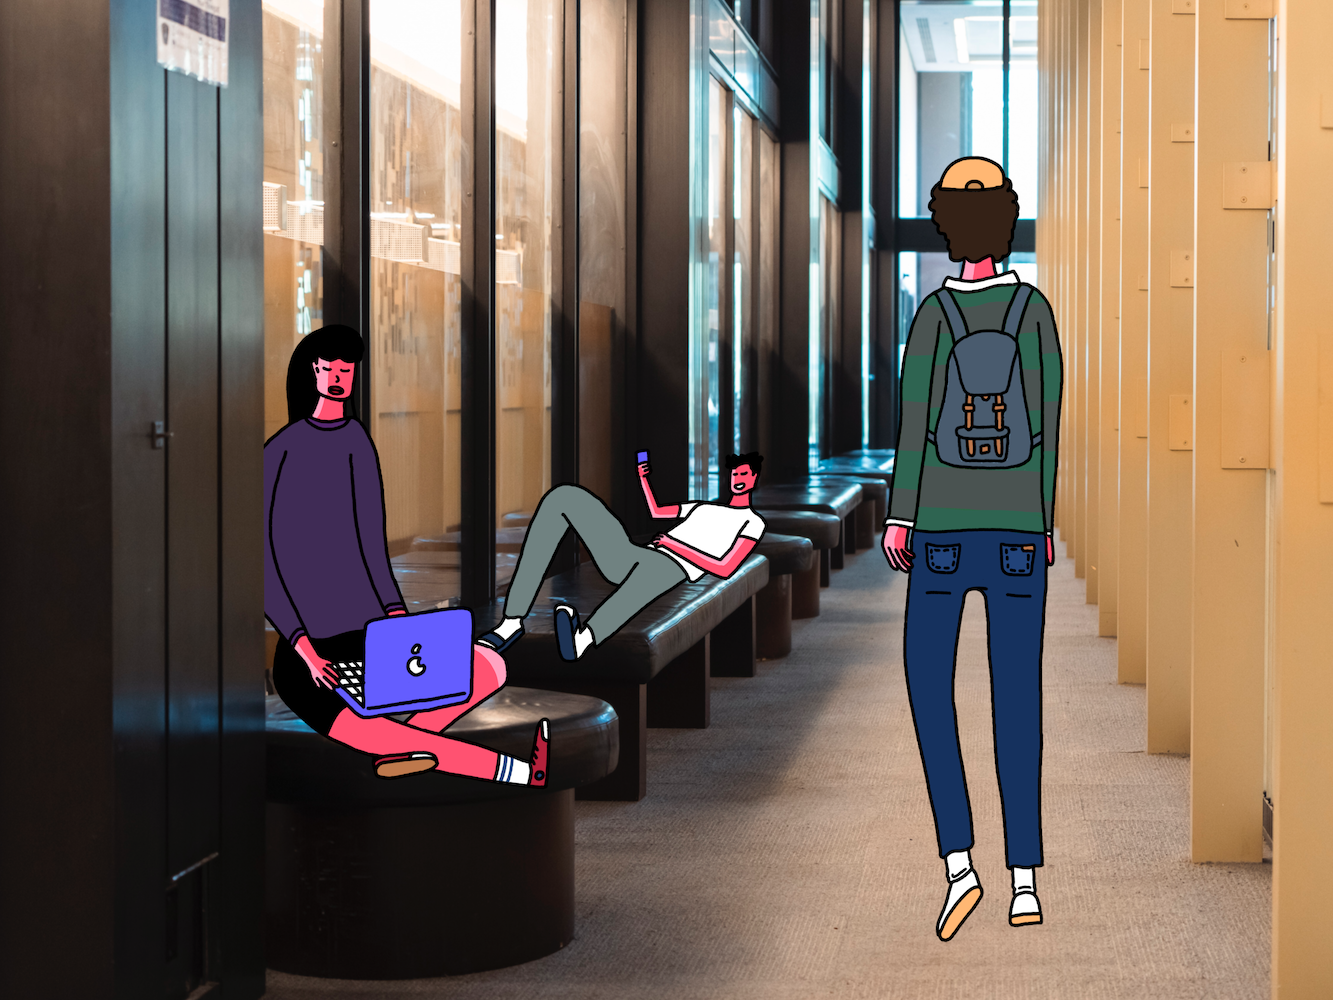 An photo illustration of the hallway of the Bobst Library with people occupying the space.